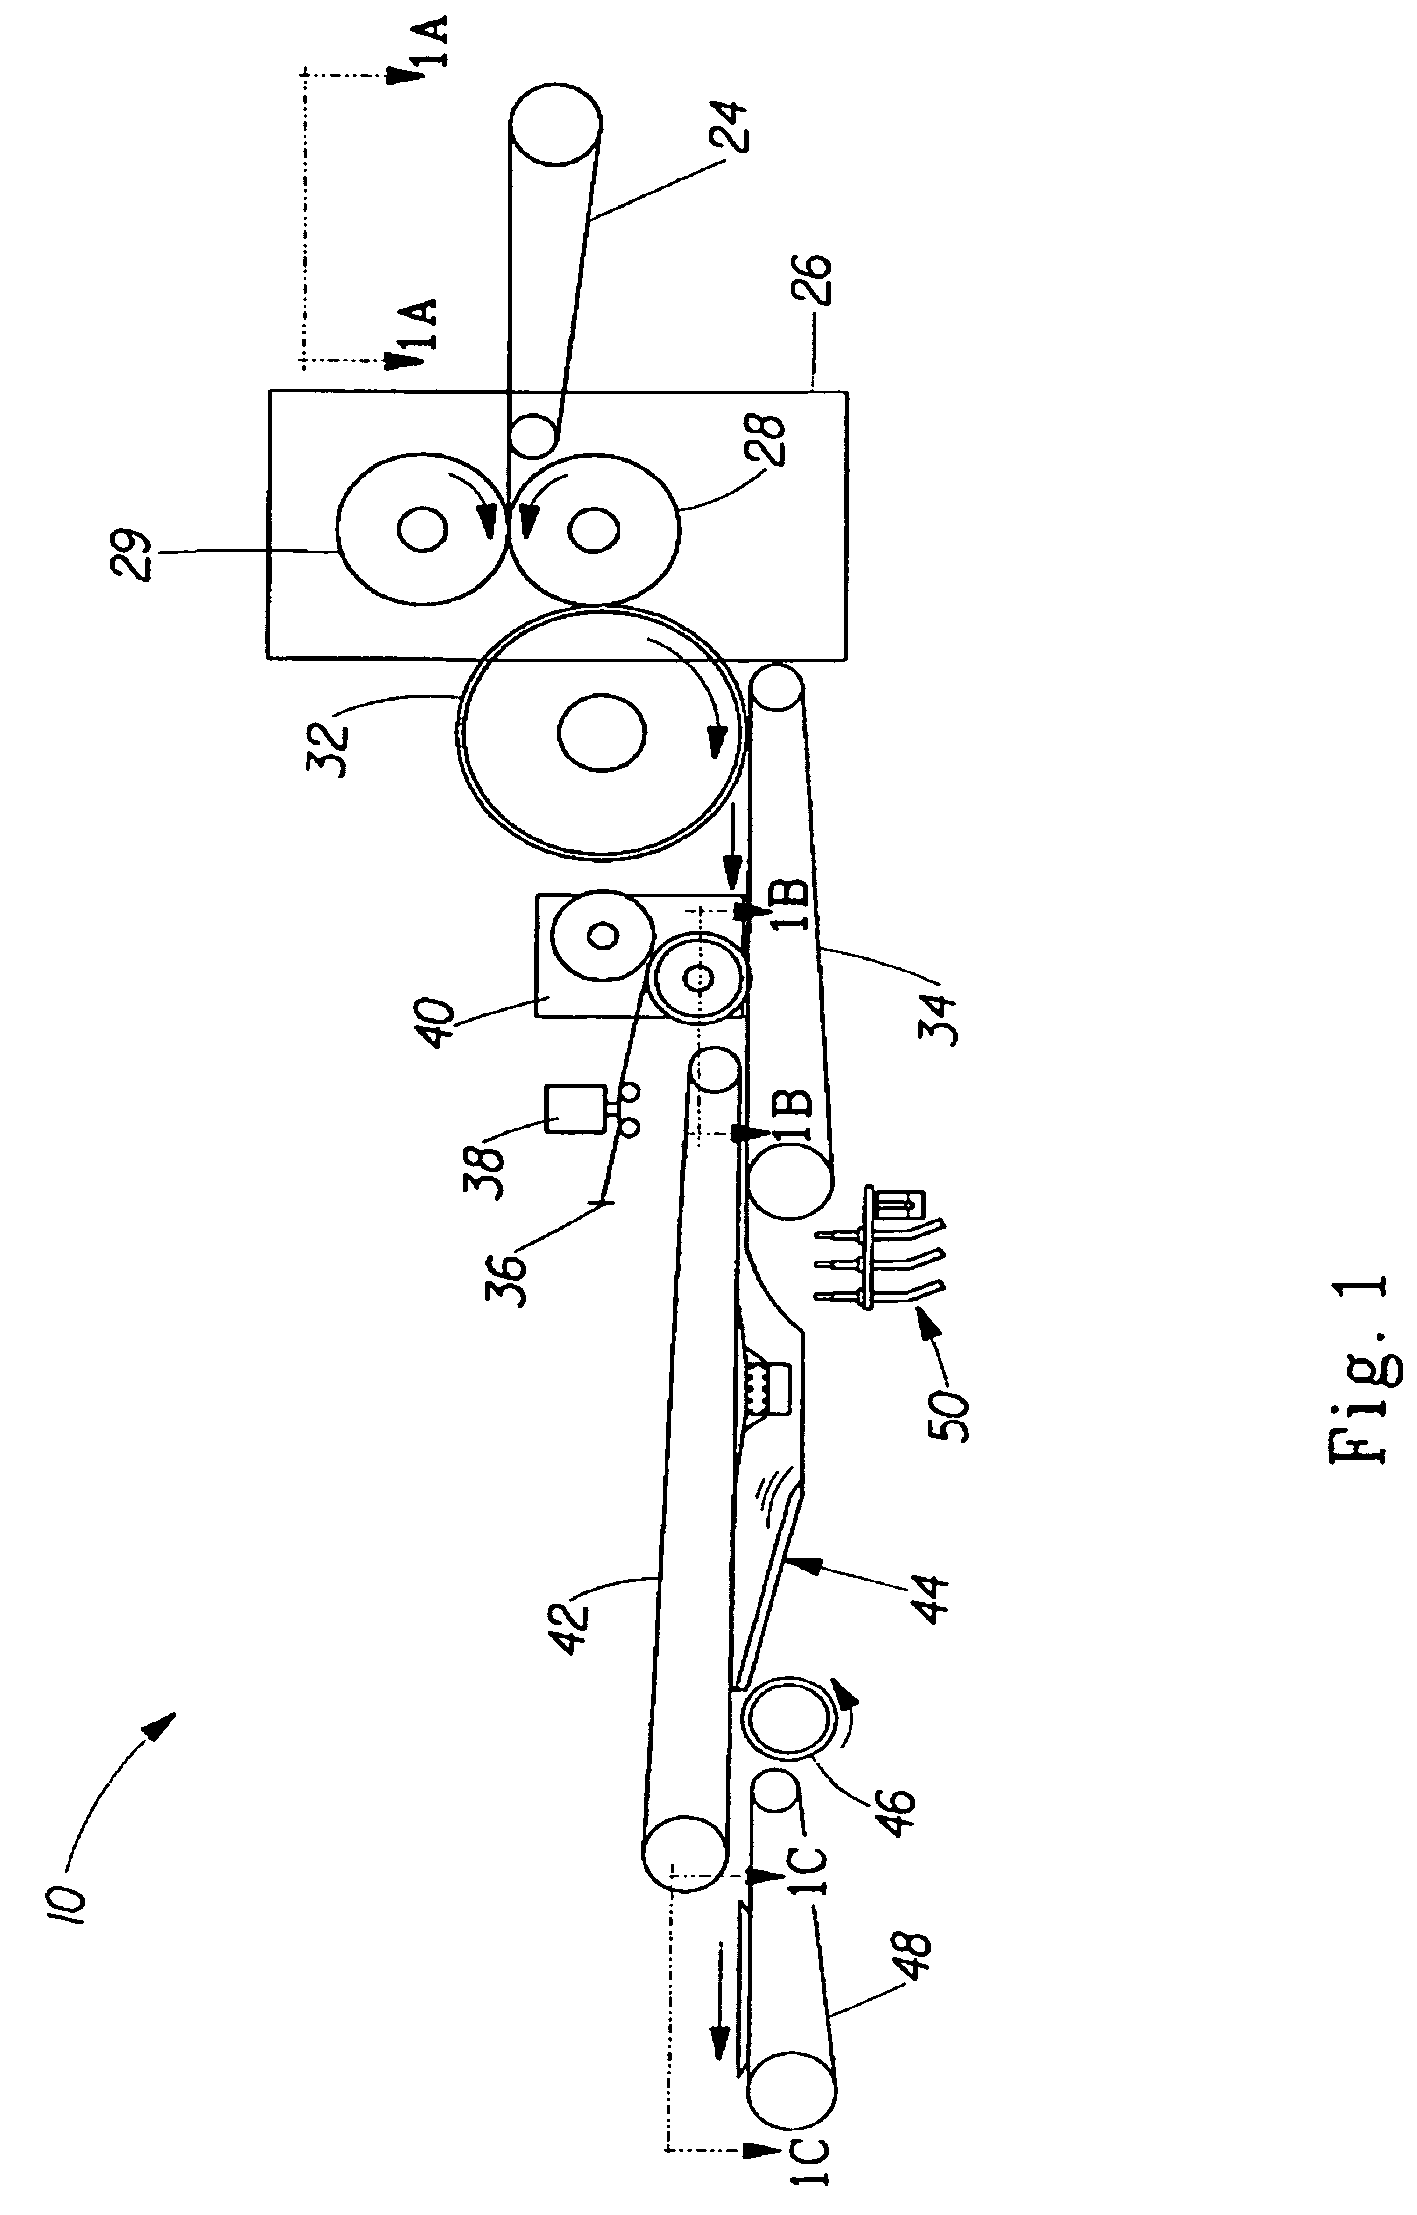 Folding system and process for a continuous moving web operation